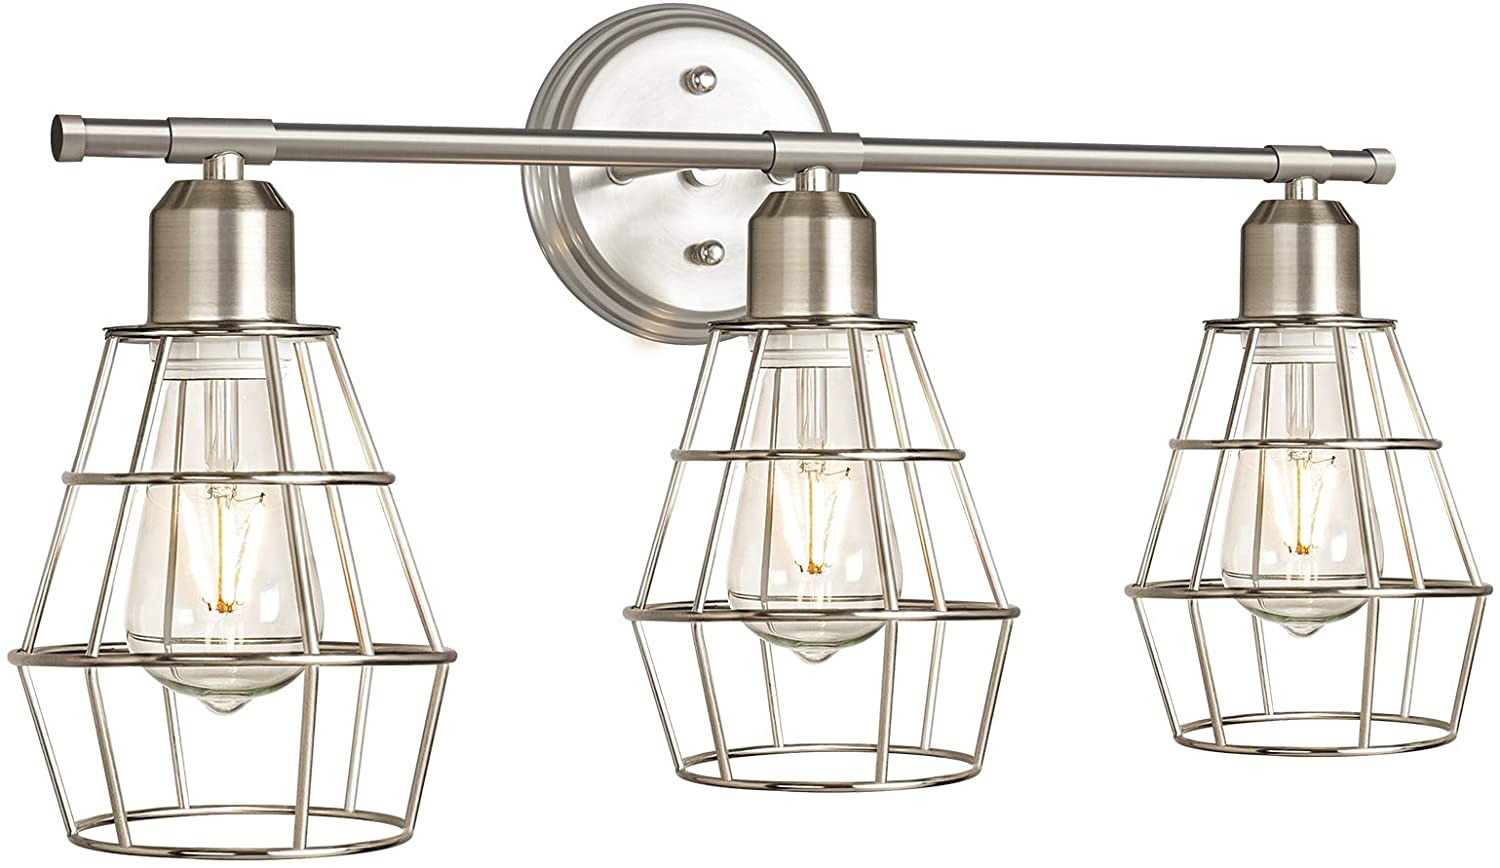 3-Light Industrial Bathroom Vanity Lights, Brushed Nickel Wall Sconce with Silver Cage, Vintage Farmhouse Light Fixture, Anti-Rust Wall Light for Dressing Table, Mirror Cabinets, Kitchen, Living Room